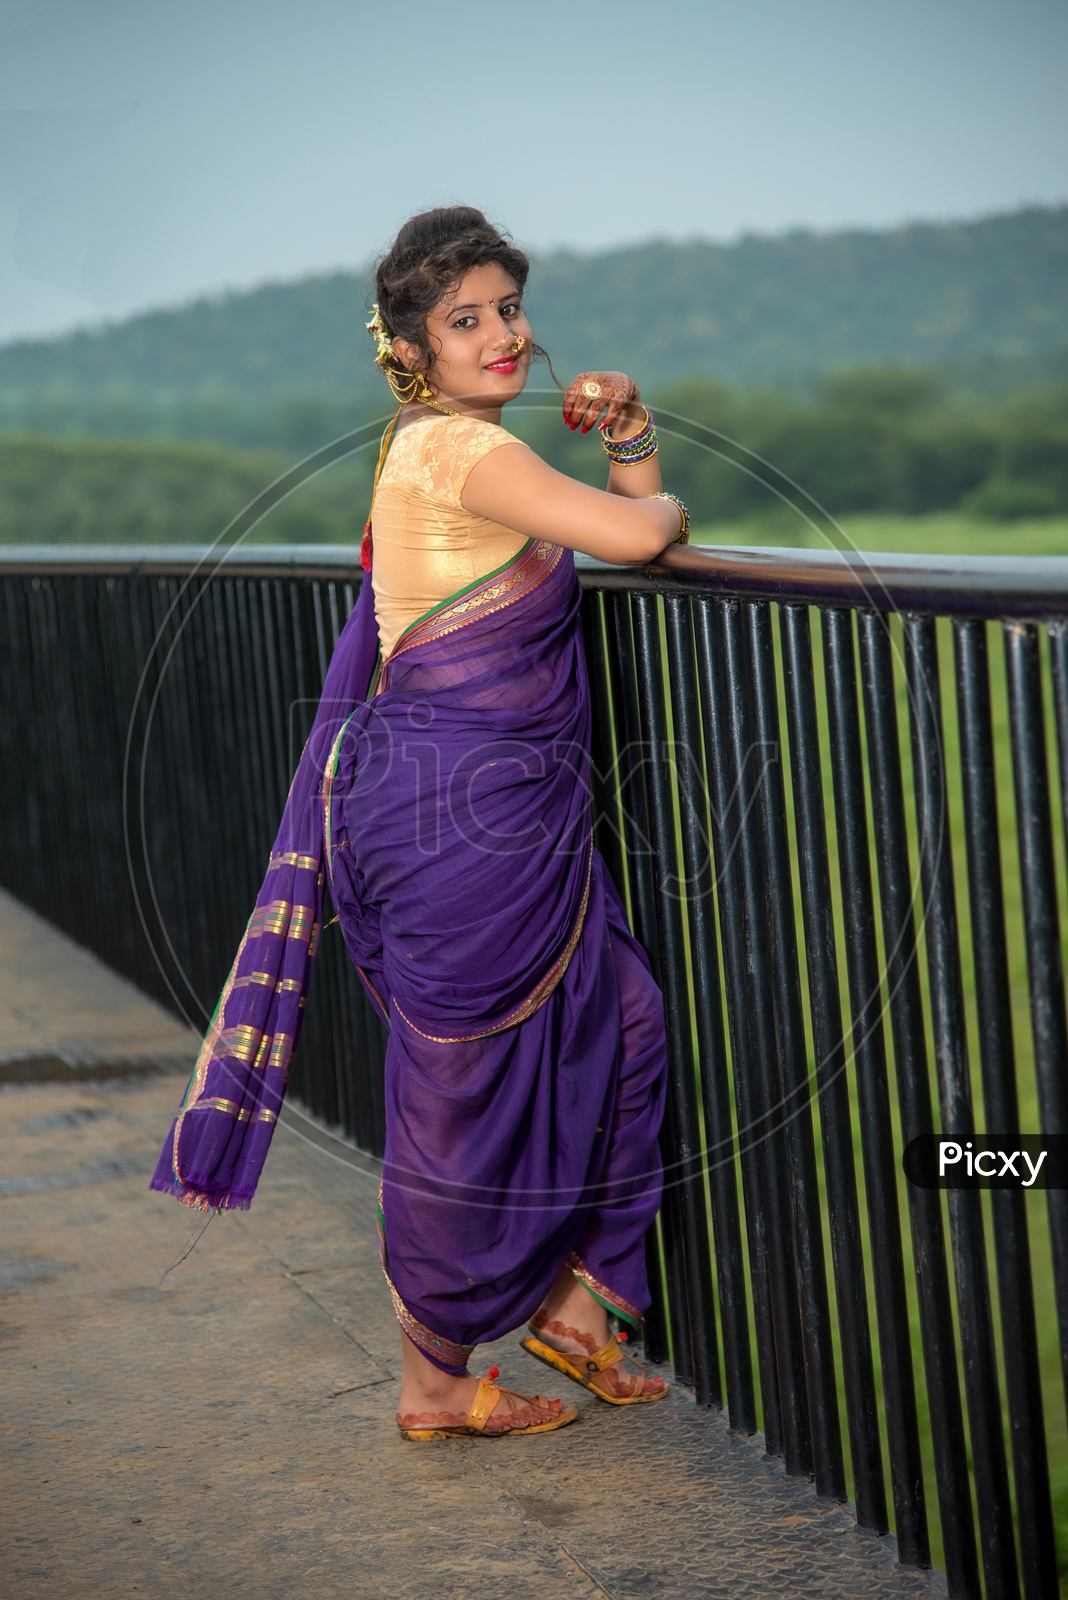 A Woman in Traditional Indian Clothing Posing Outdoor · Free Stock Photo